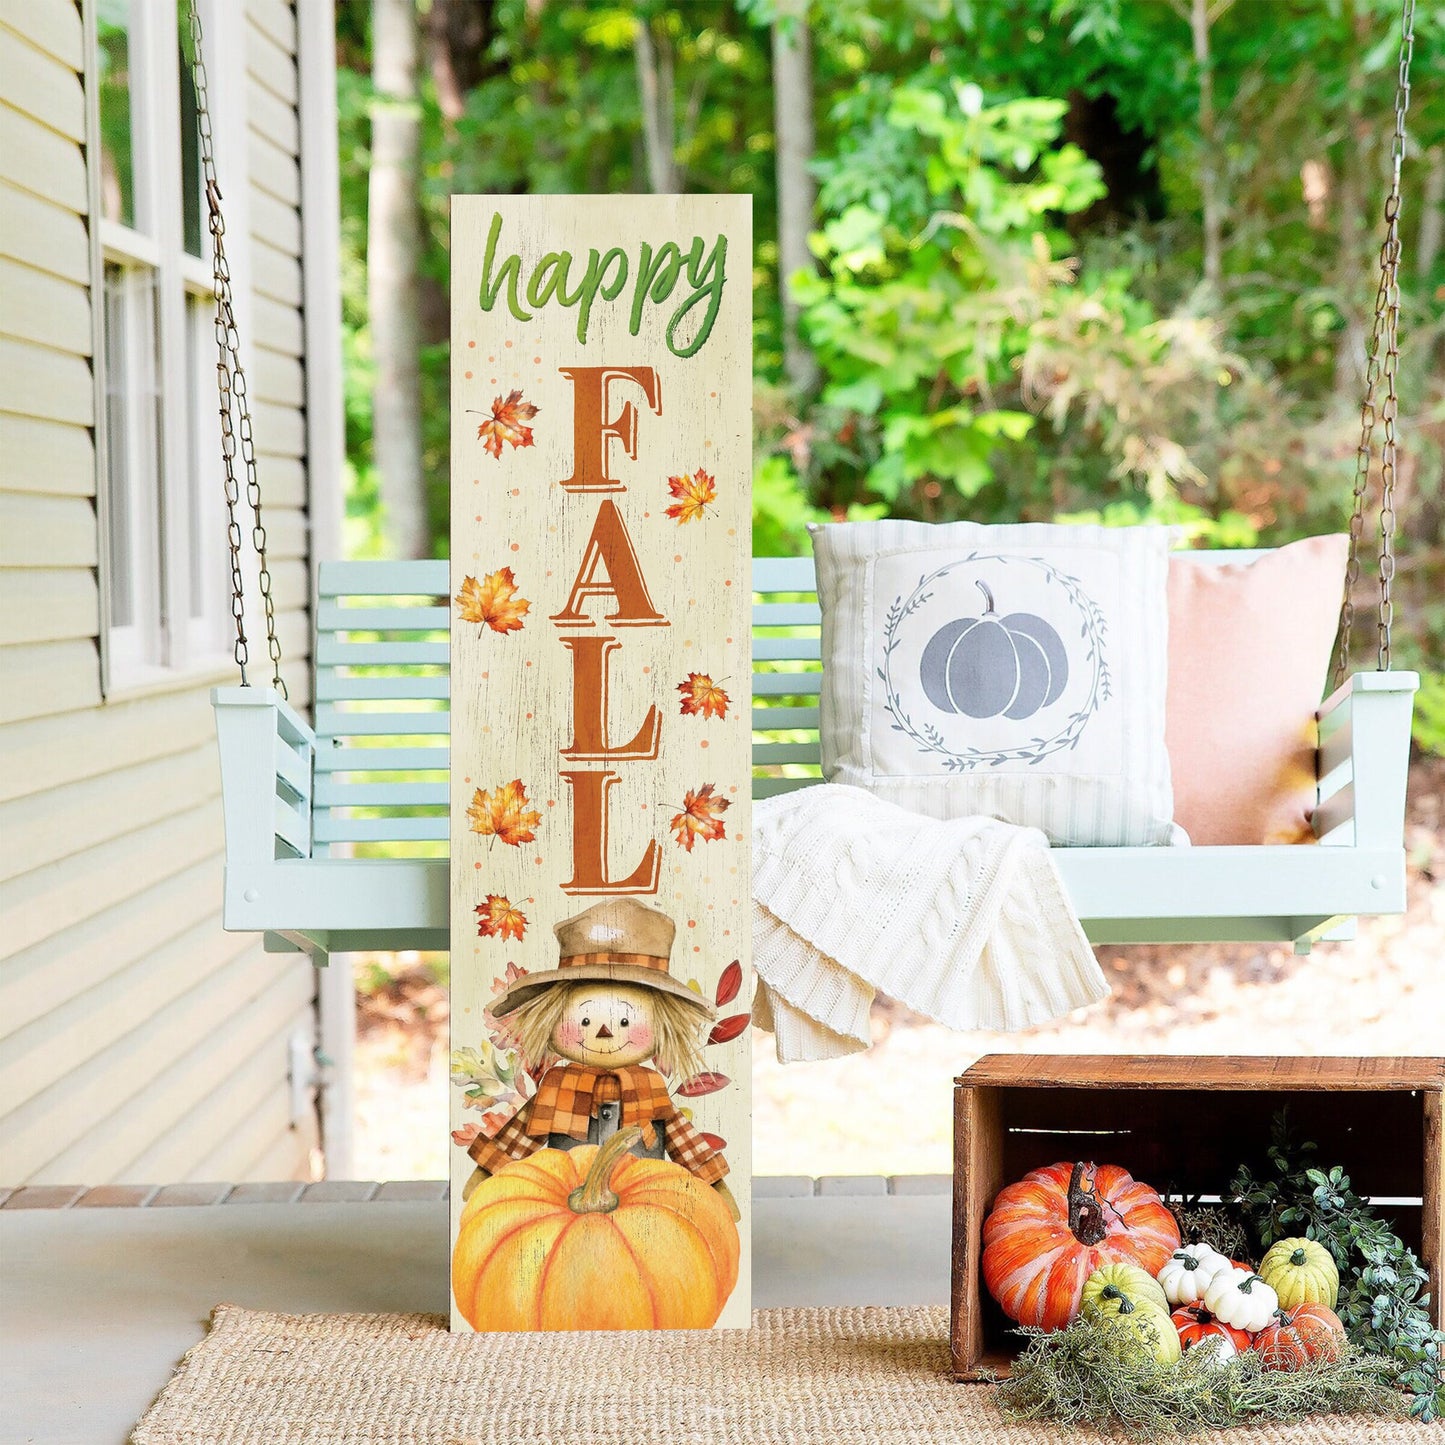 Welcome Autumn: 36in 'Happy Fall' Wooden Porch Sign with Unique Scarecrow Design - Perfect Seasonal Decor for Your Front Door or Porch!